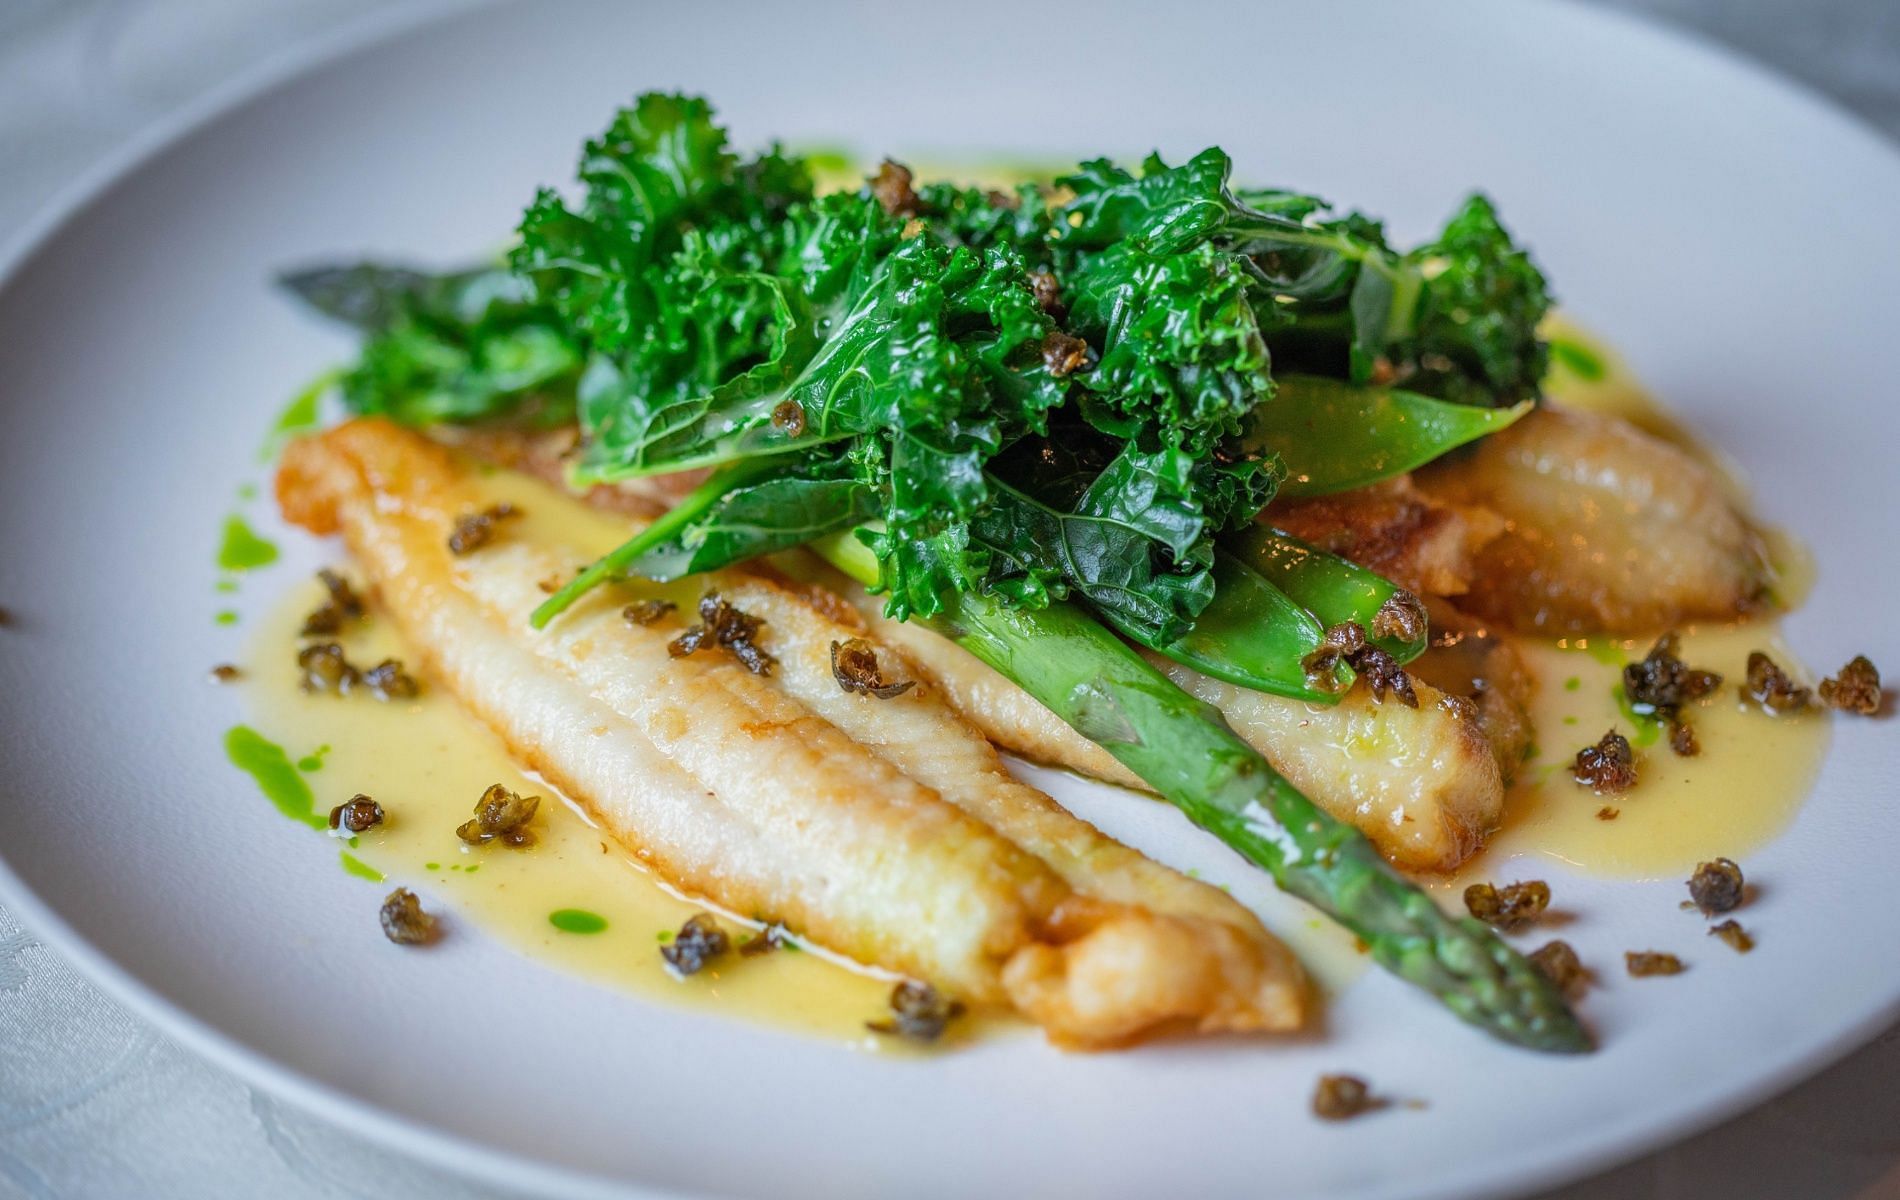 Cod is a white fish that is low in fat. (Image by Valeria Boltneva via Pexels)